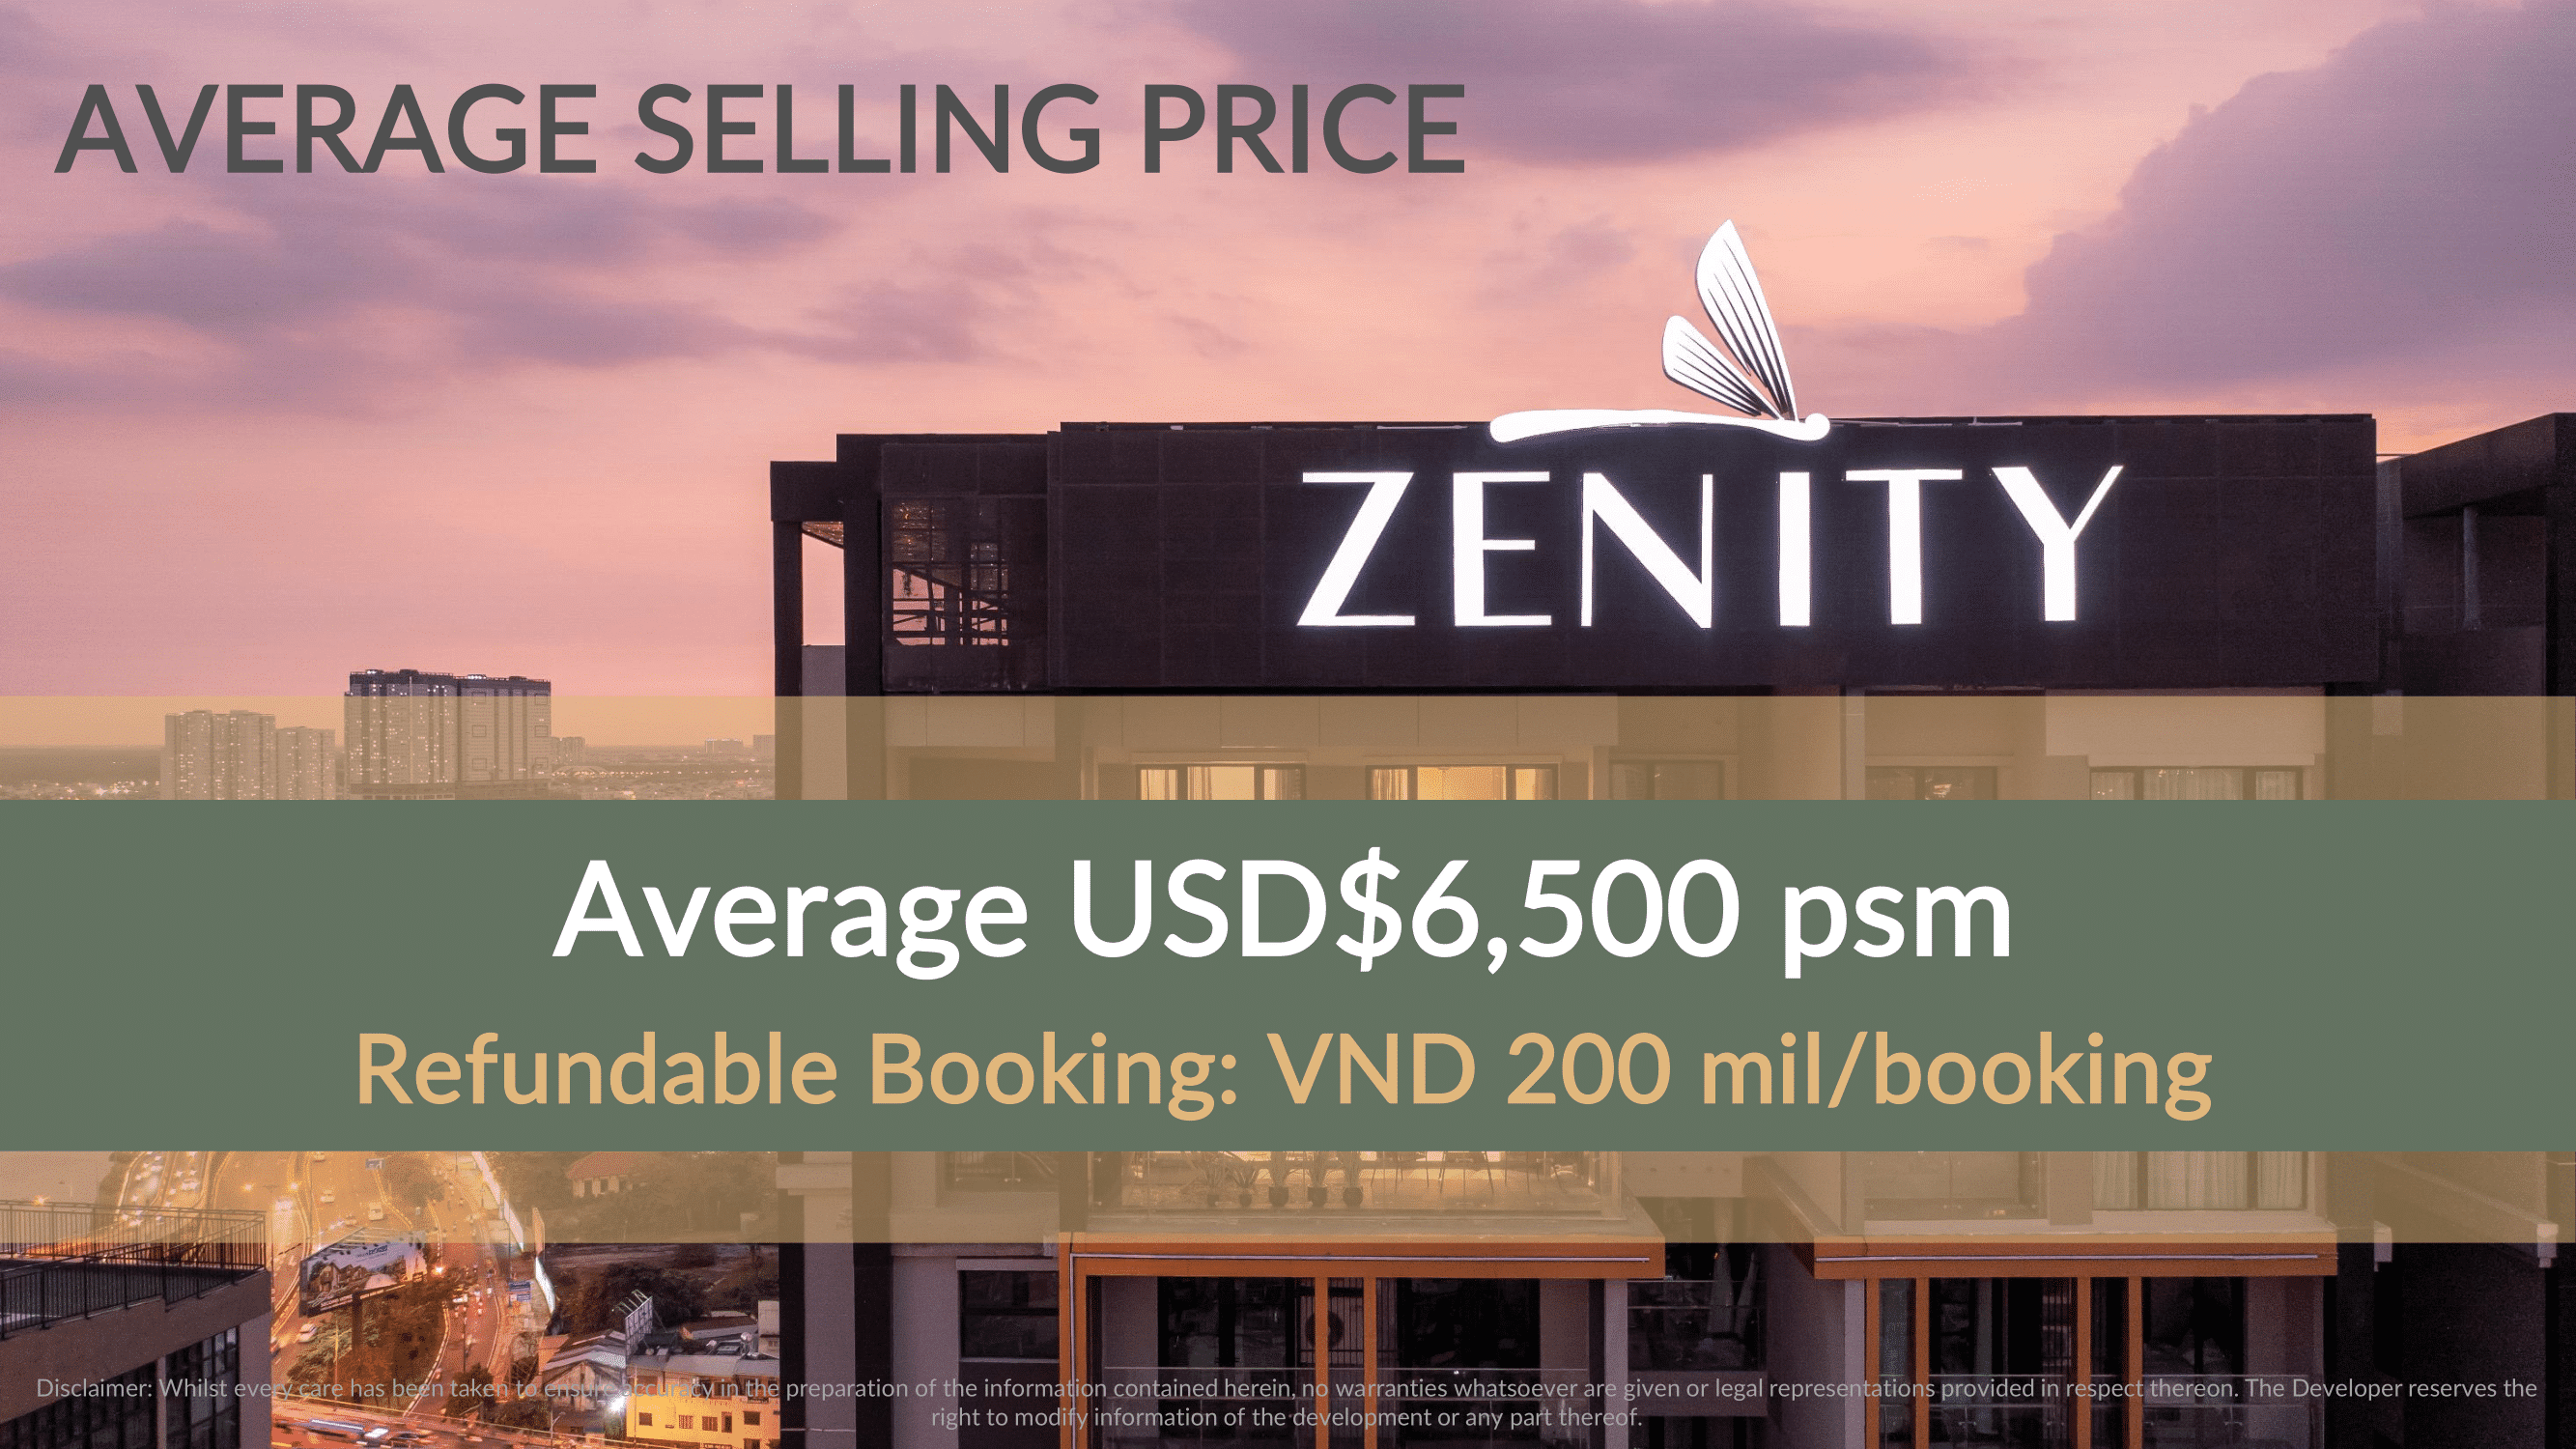 Zenity Selling Price